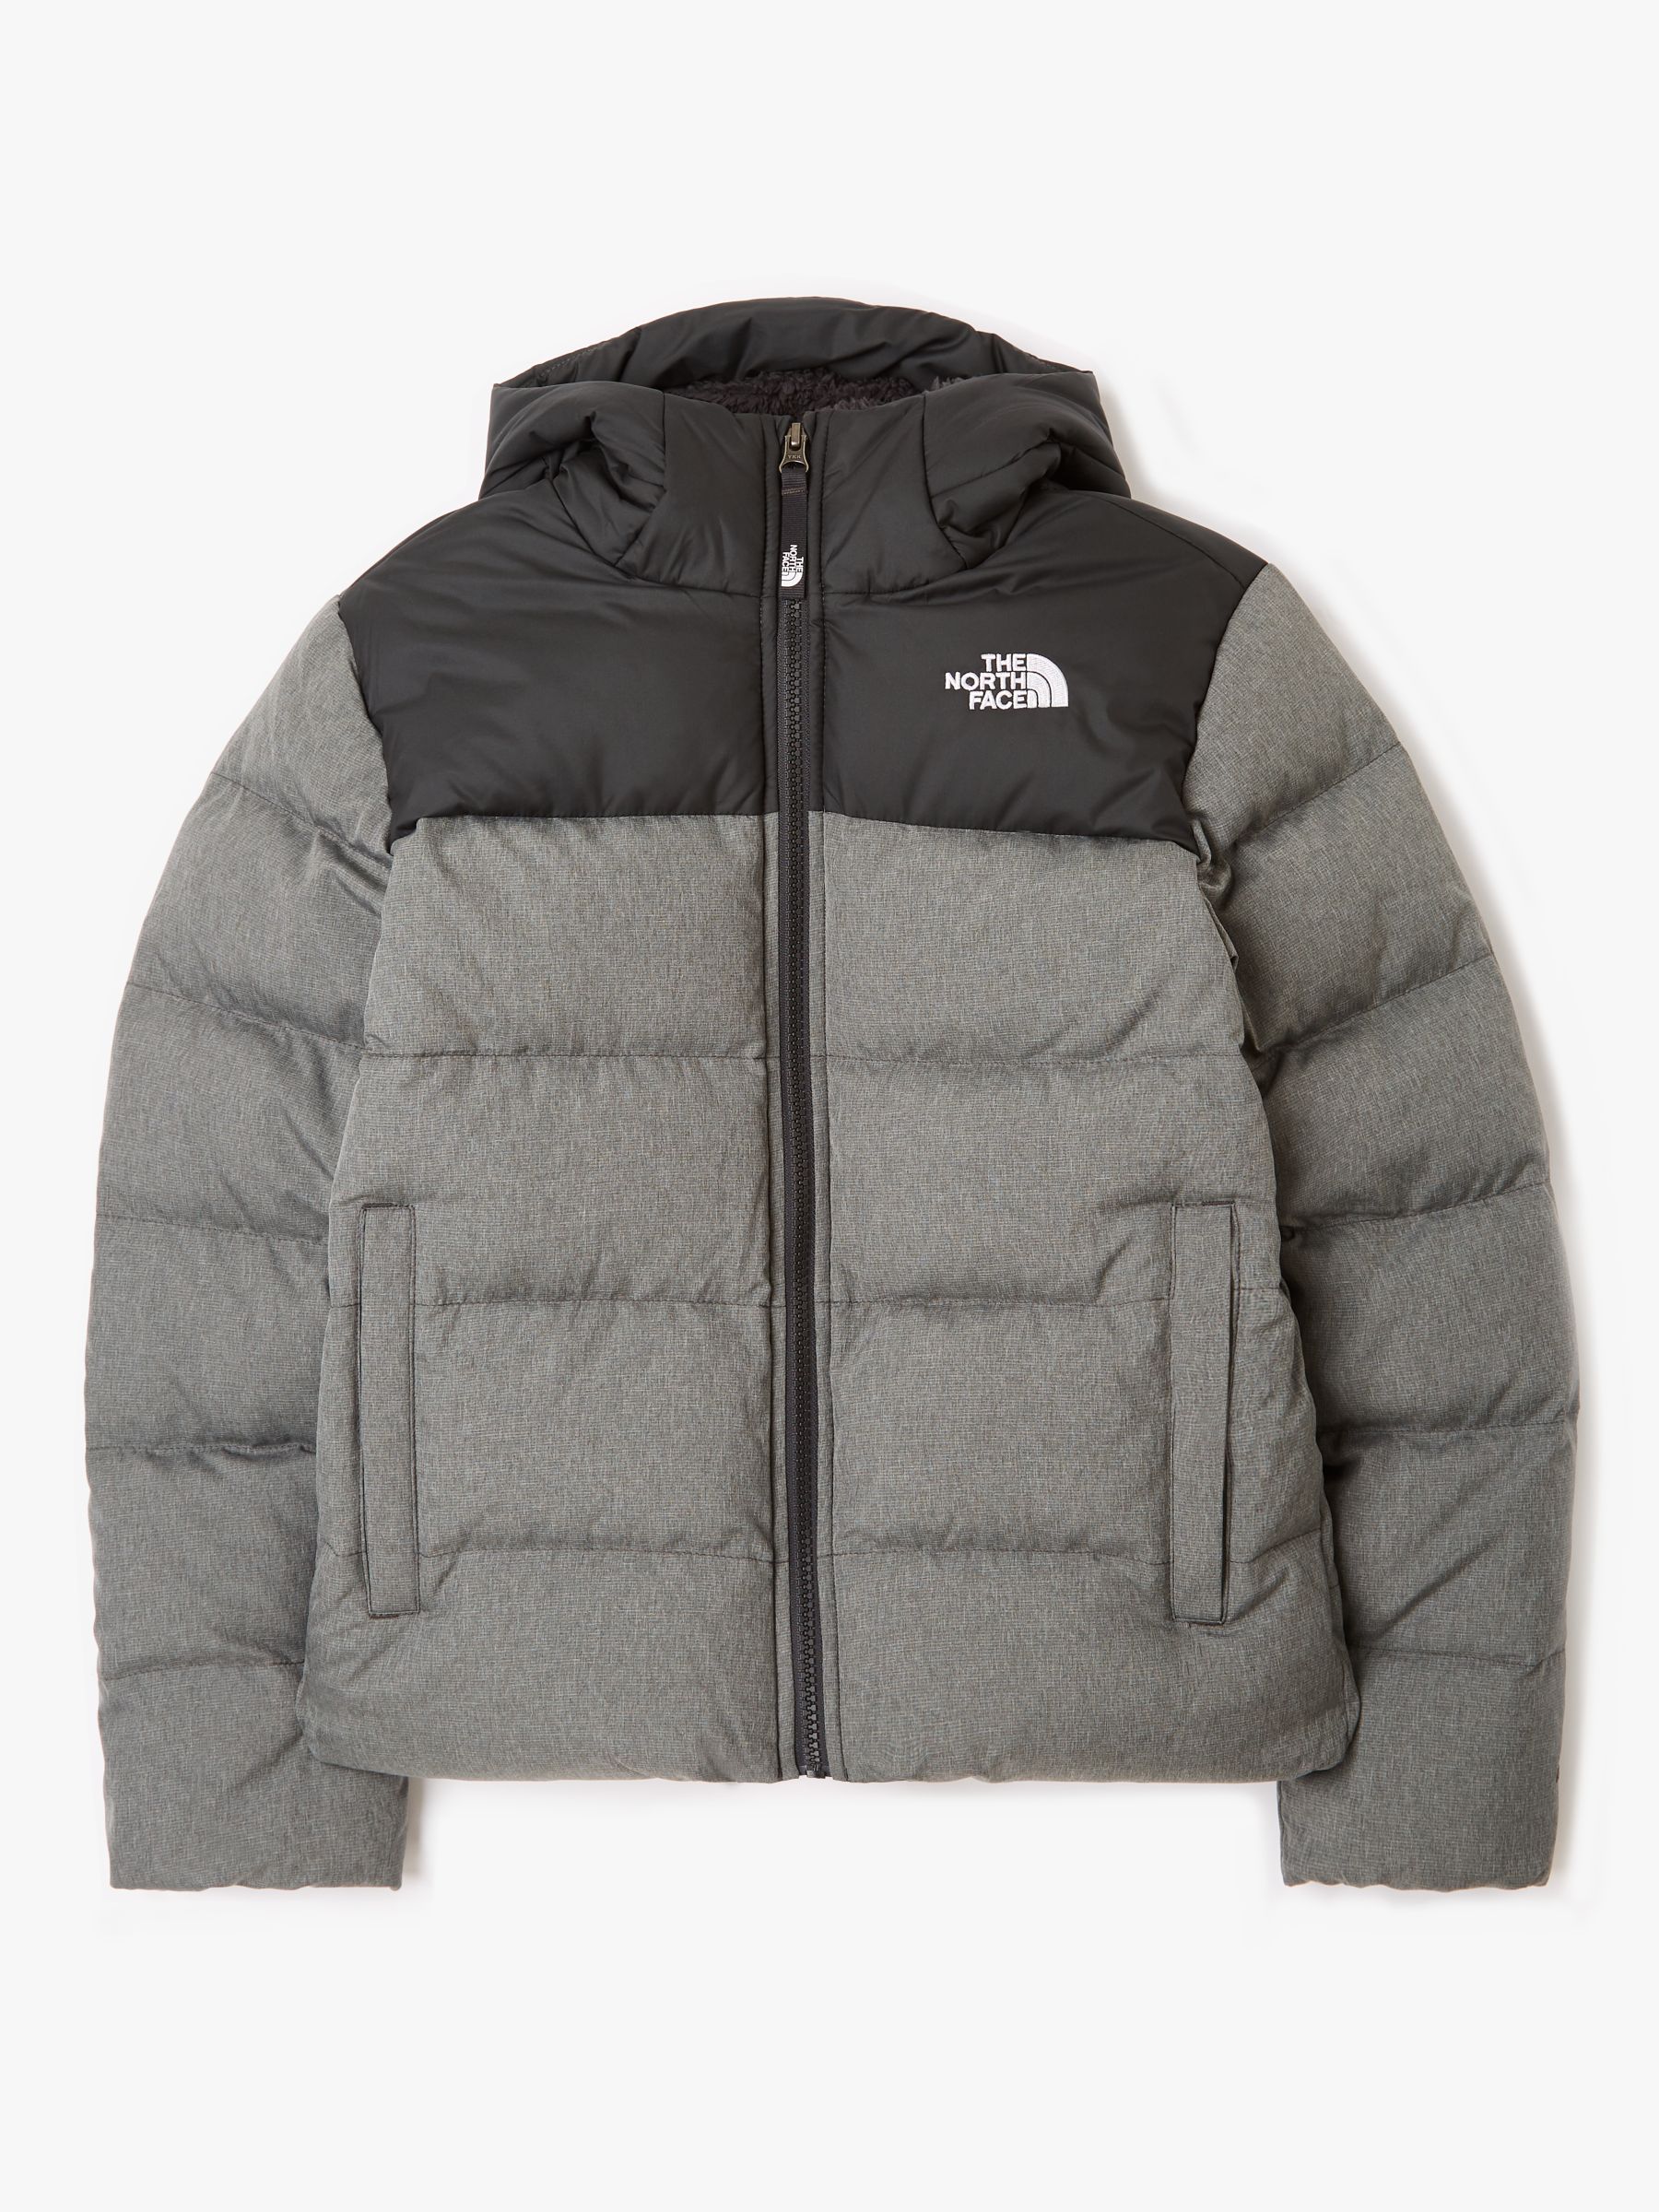 north face coats for boys